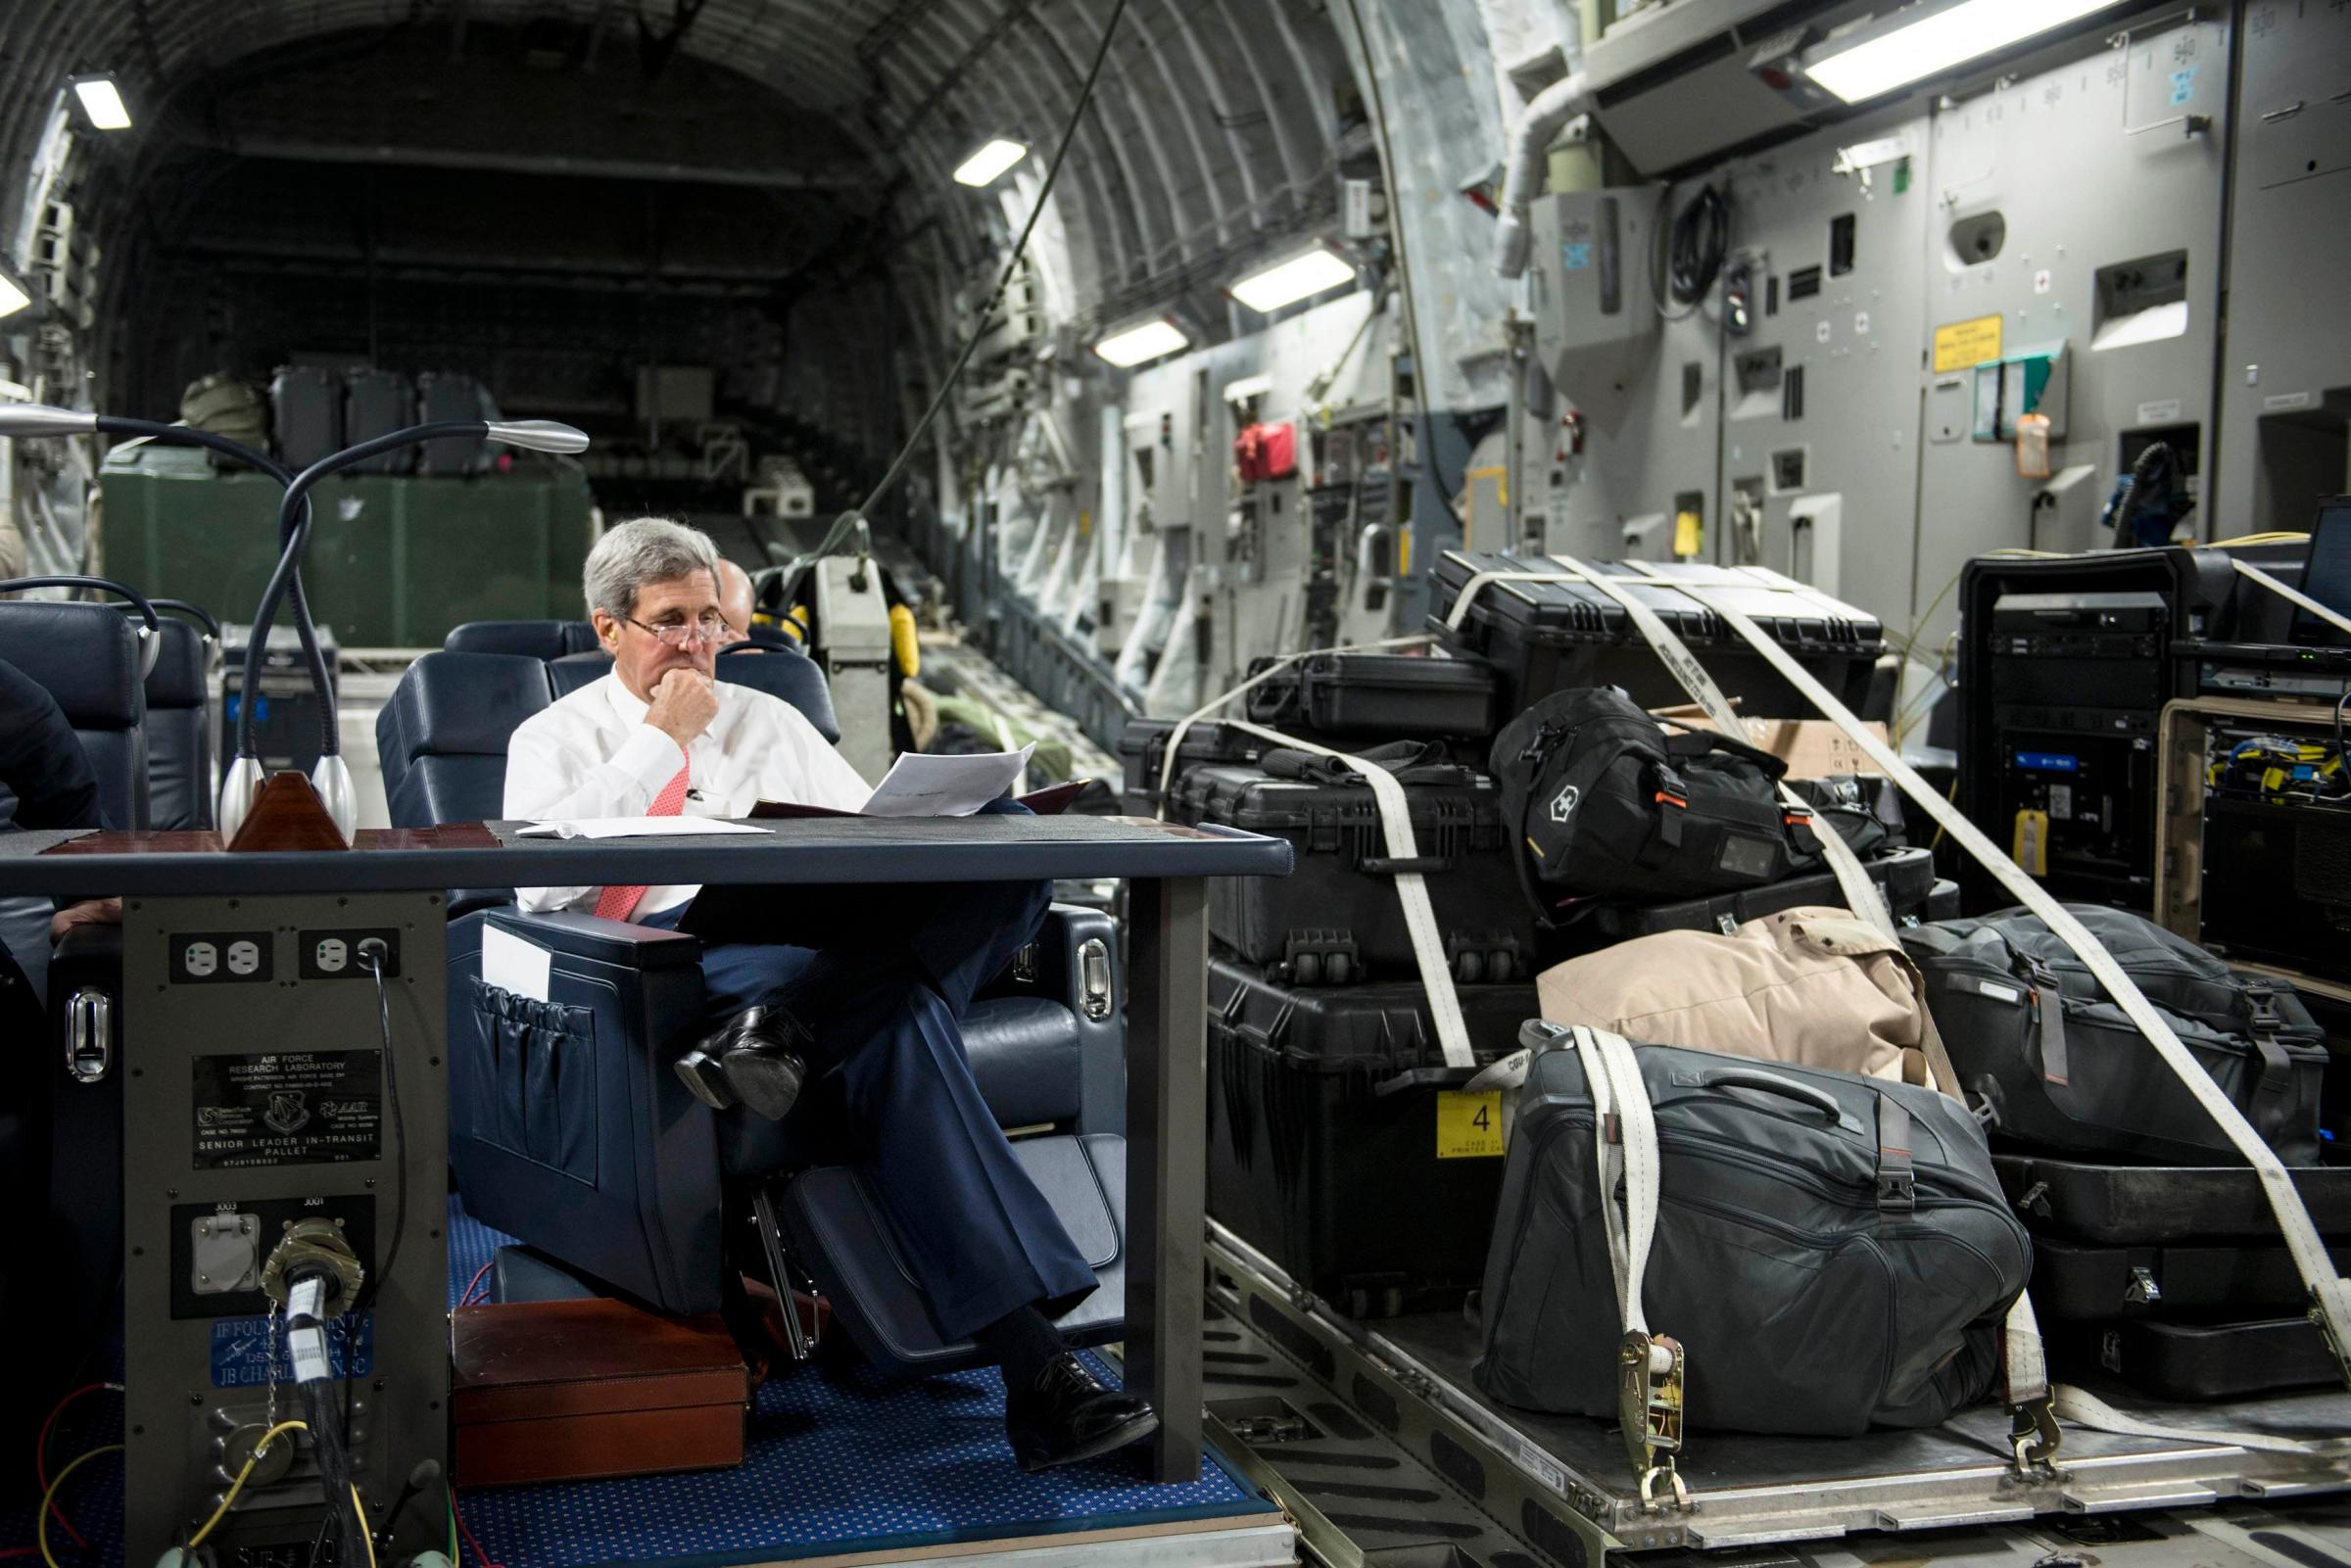 U.S. Secretary of State John Kerry looks over papers while flying from Jordan to Iraq on Sept. 10, 2014.